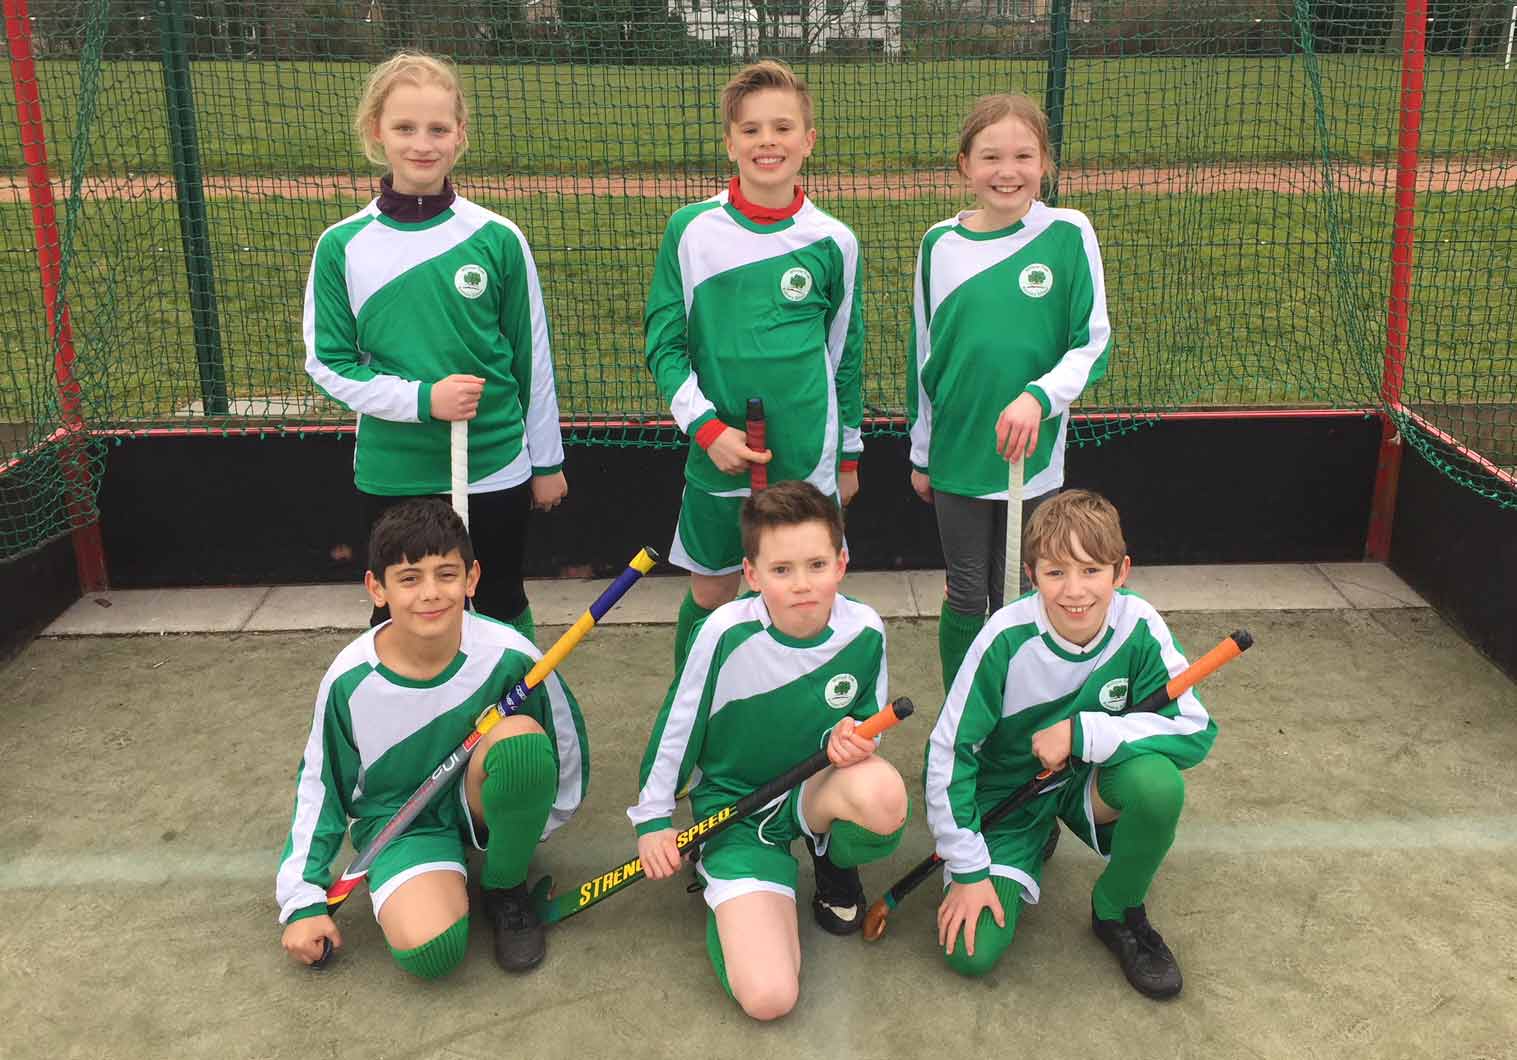 Five of our year 6 children also tried their hand at hockey at the Quicksticks event at St Aidan’s